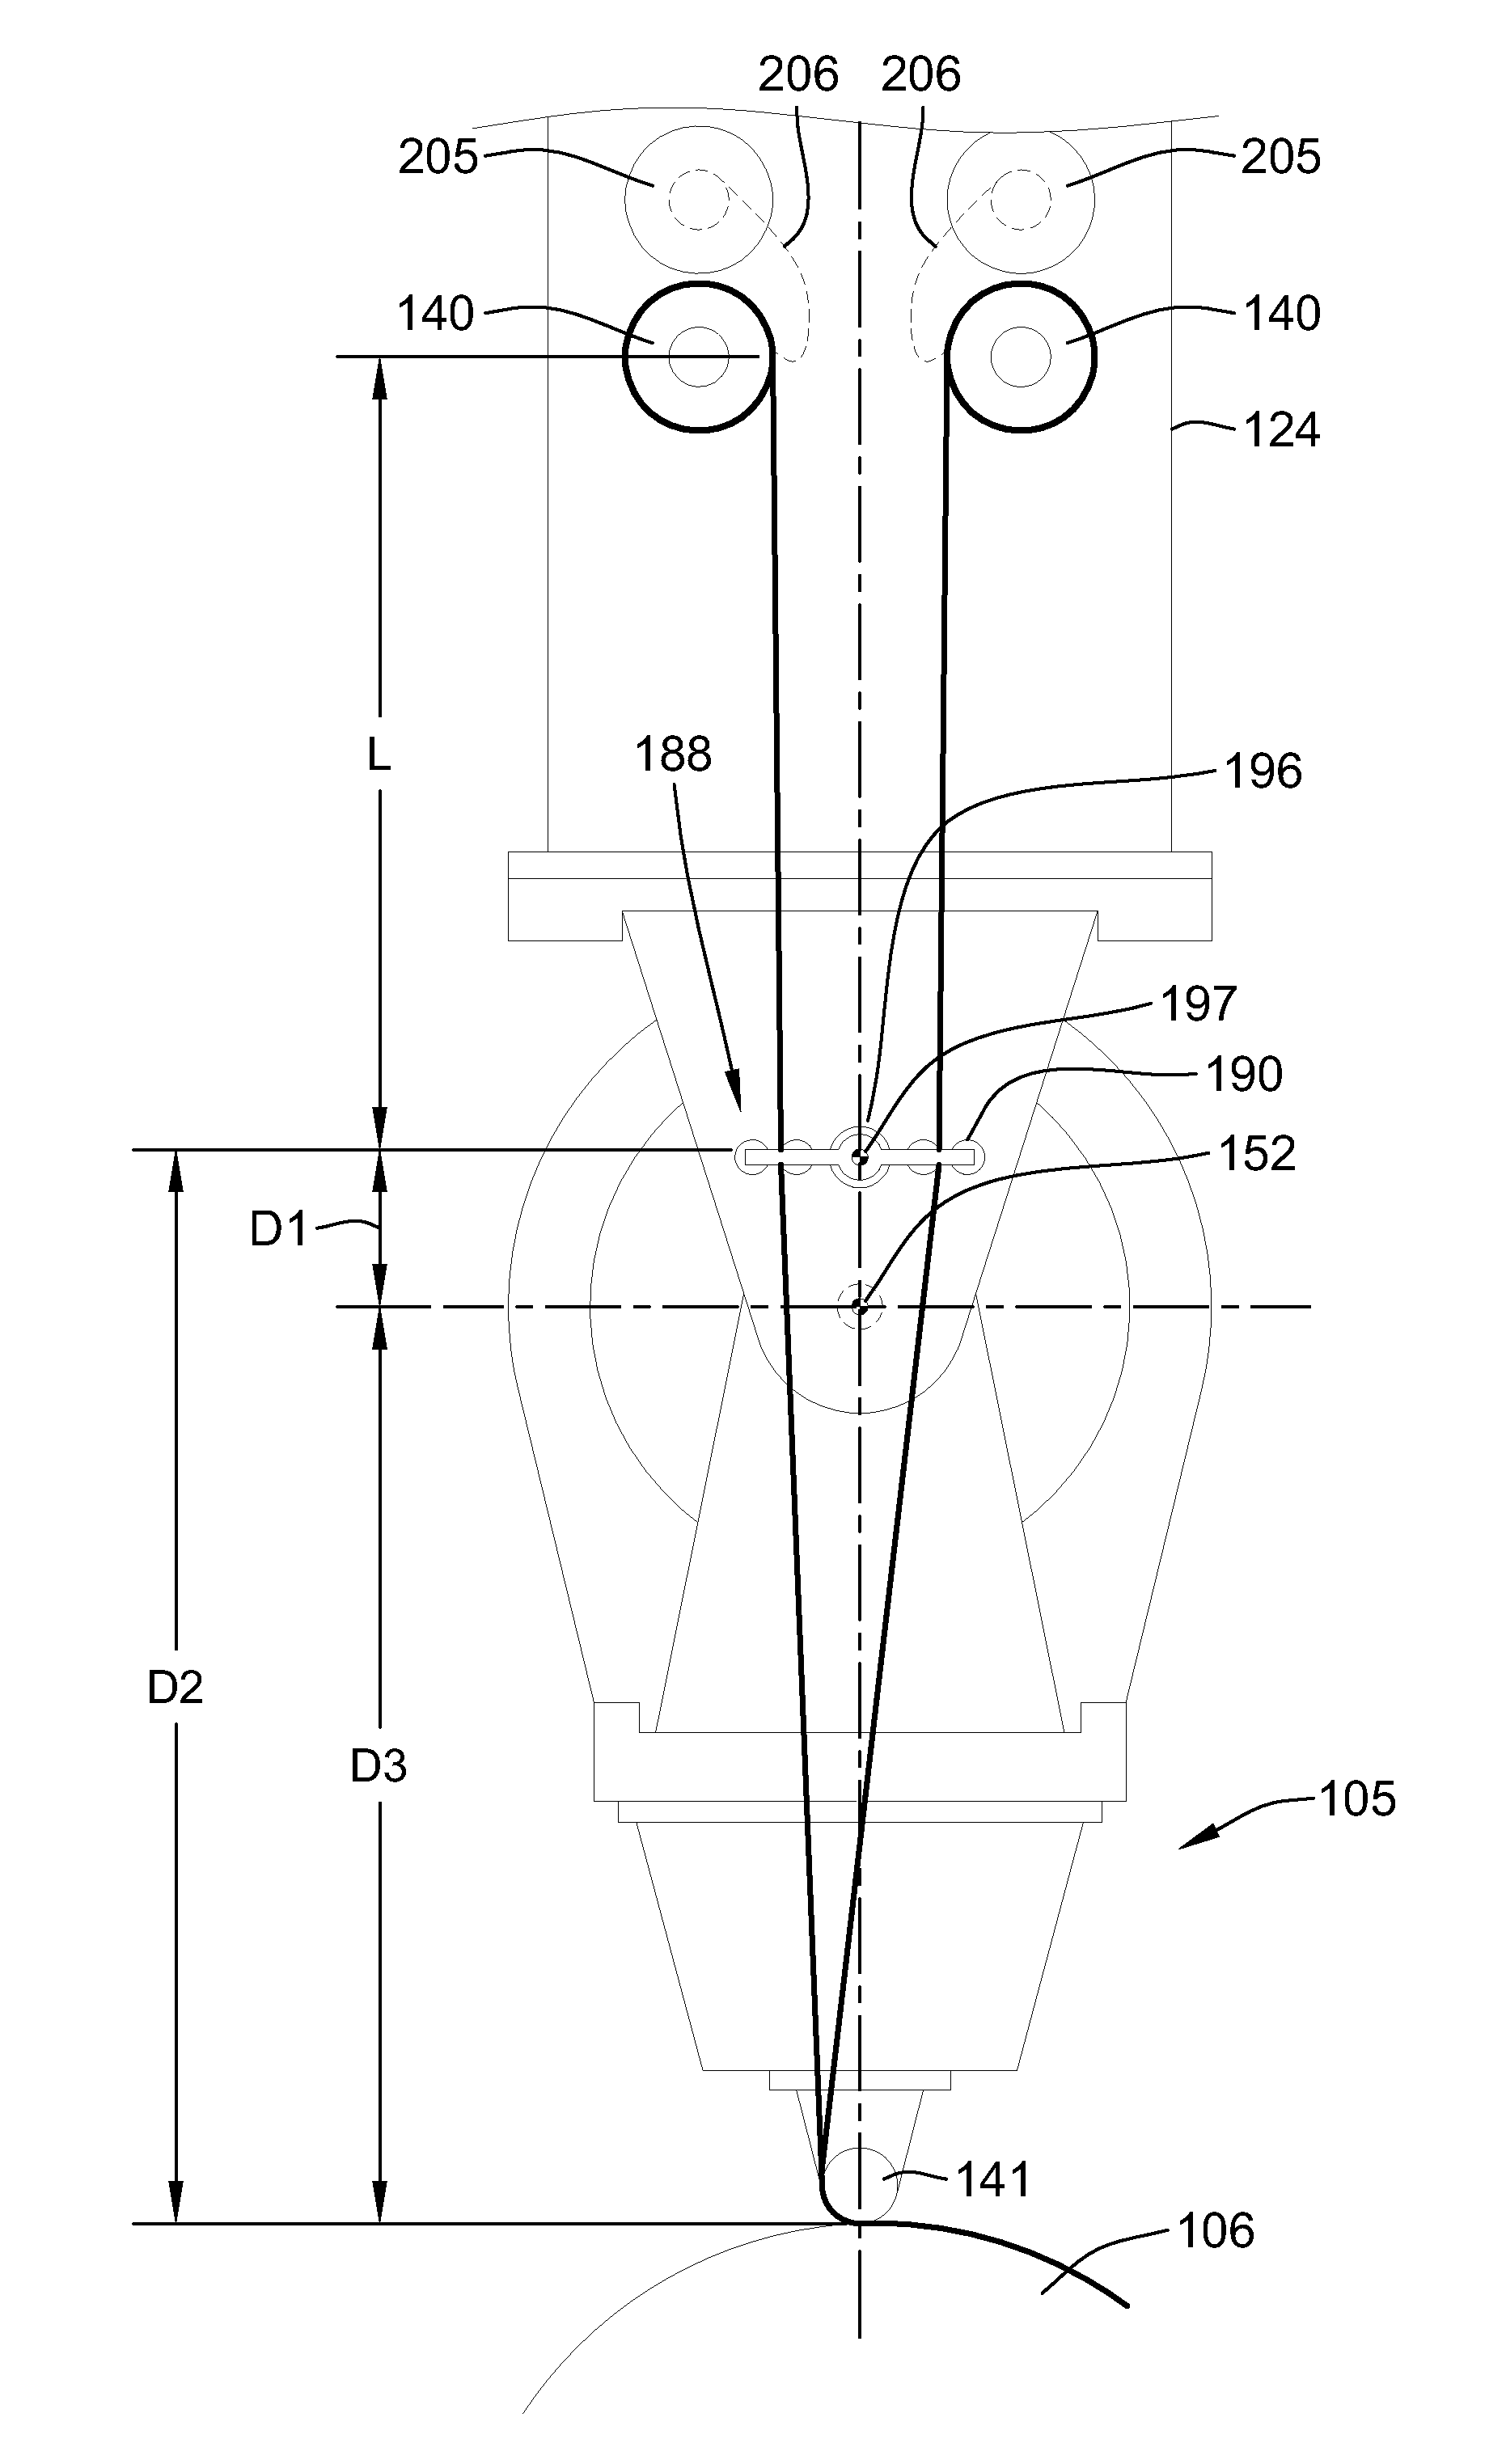 Fiber delivery apparatus and system having a creel and fiber placement head with polar axis of rotation